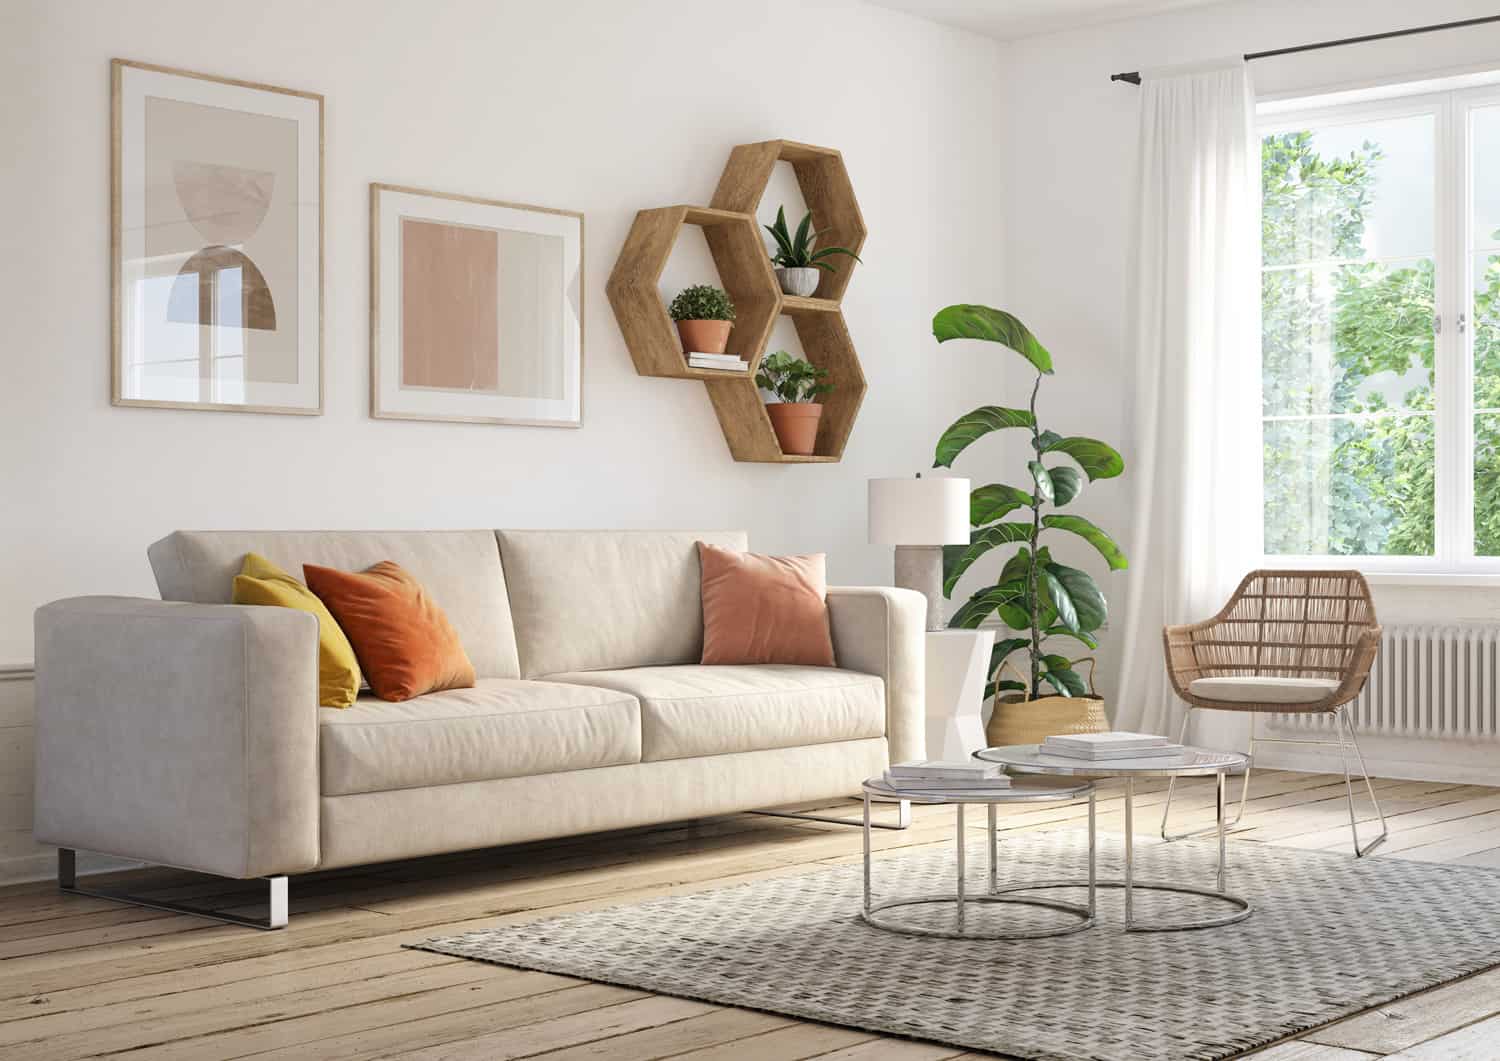 Bohemian living room interior 3d render with beige colored furniture and wooden elements